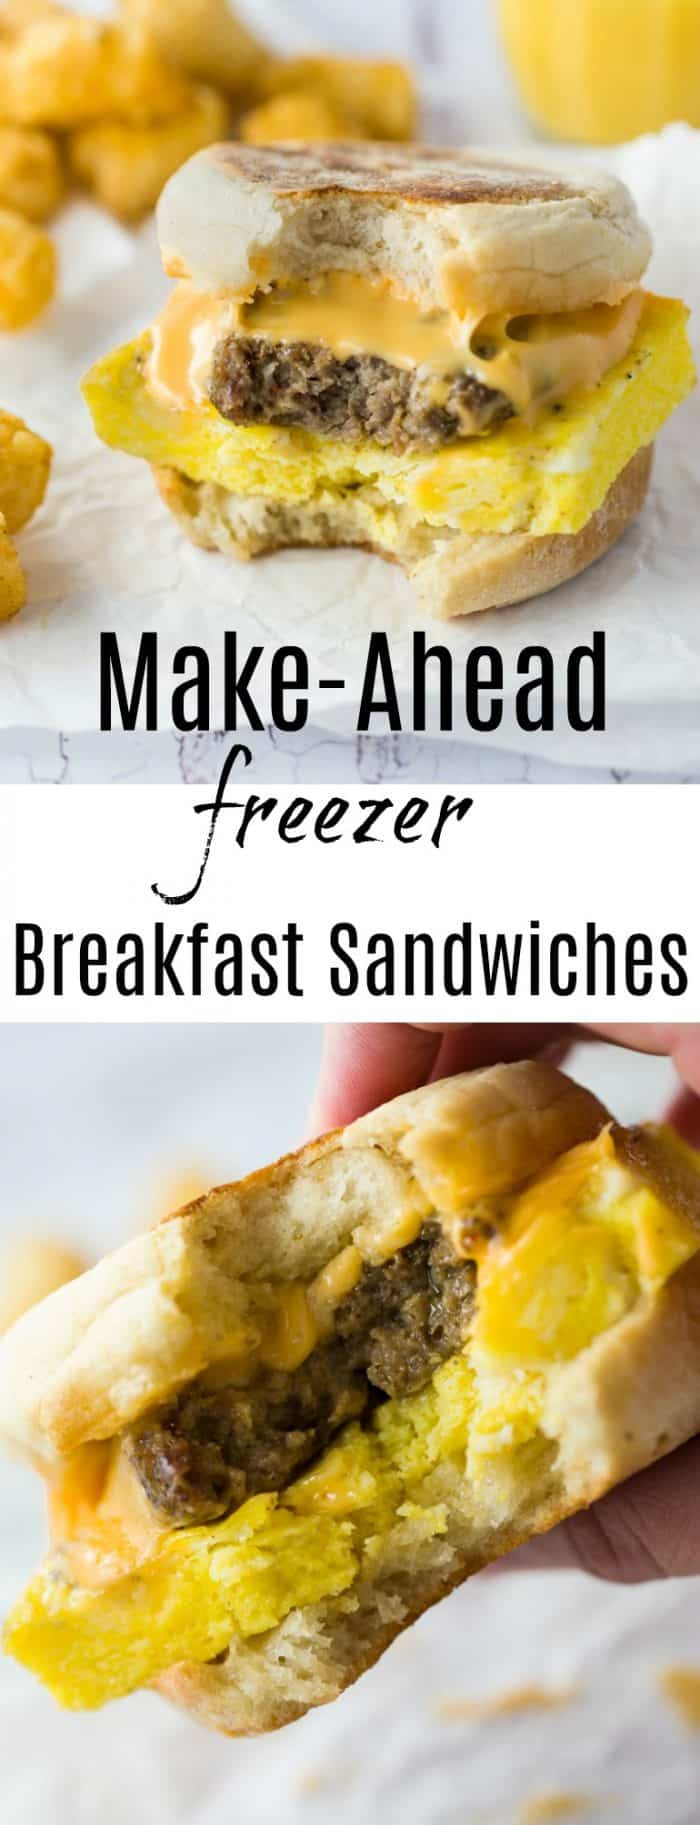 Make Ahead Breakfast Recipes To Freeze
 Make Ahead Breakfast Sandwiches The Cozy Cook